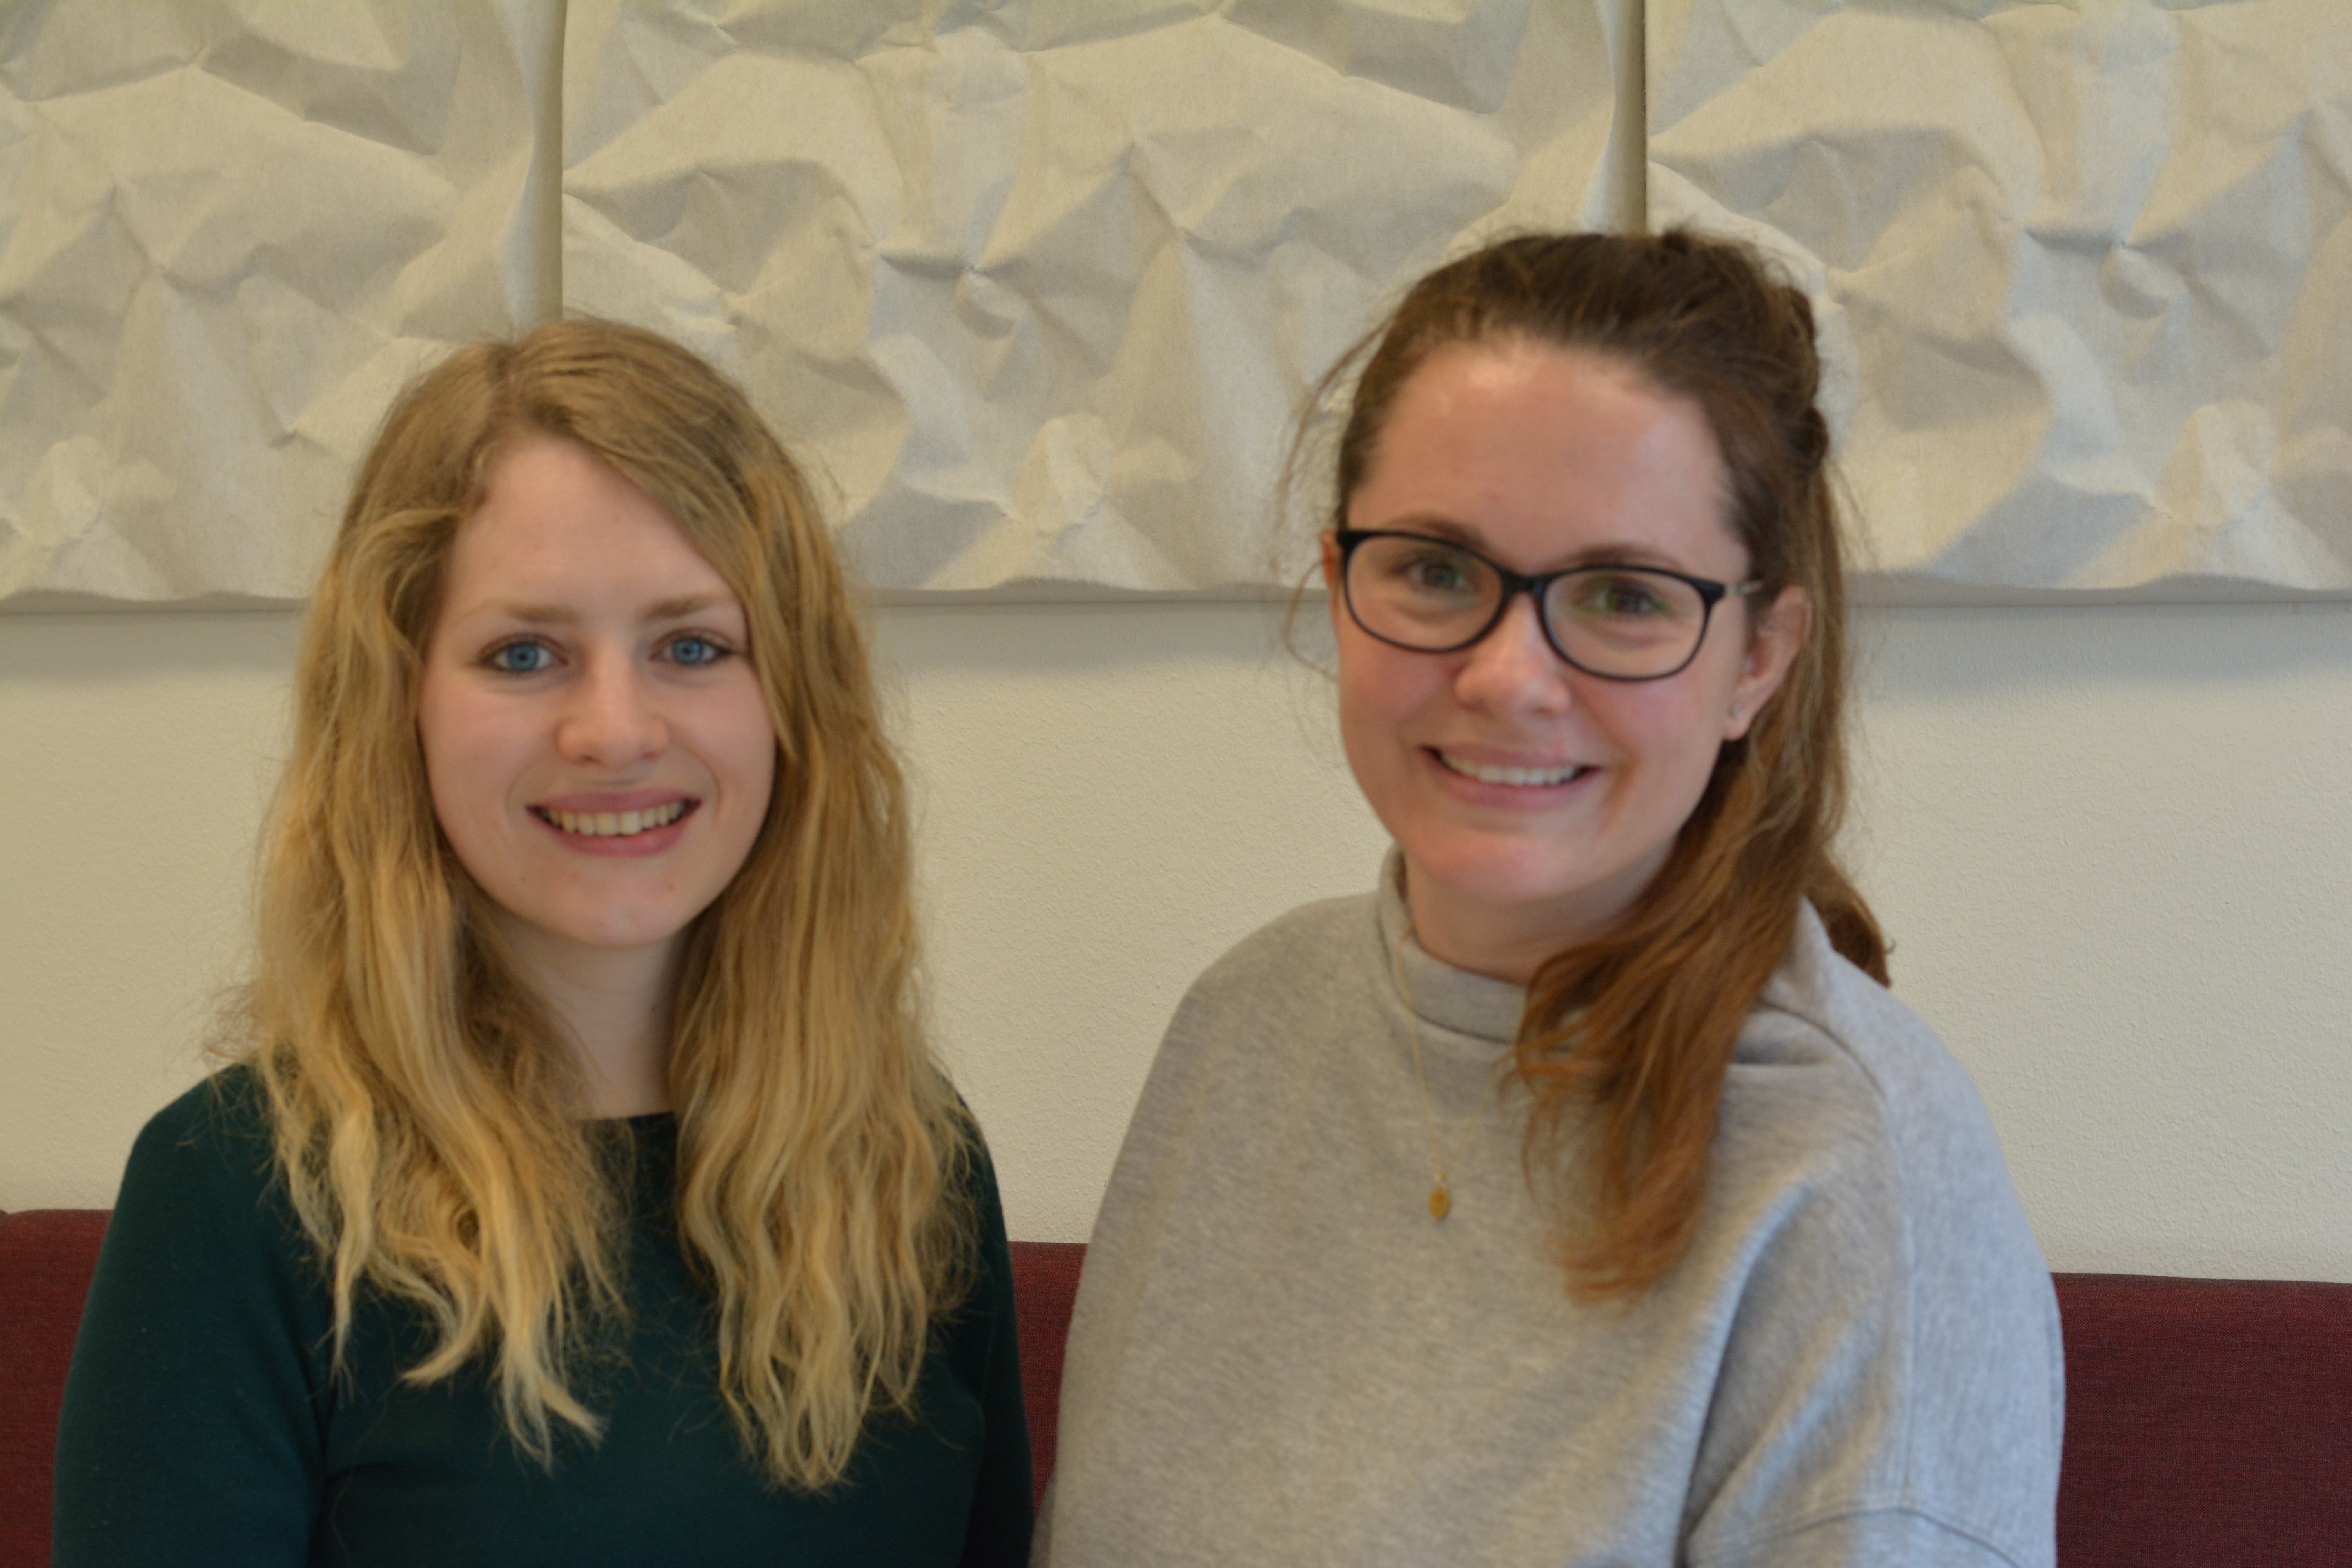 Jorunn Simonsen Thingnes (left) and Kristin Myklestu are new MultiLing research assistants